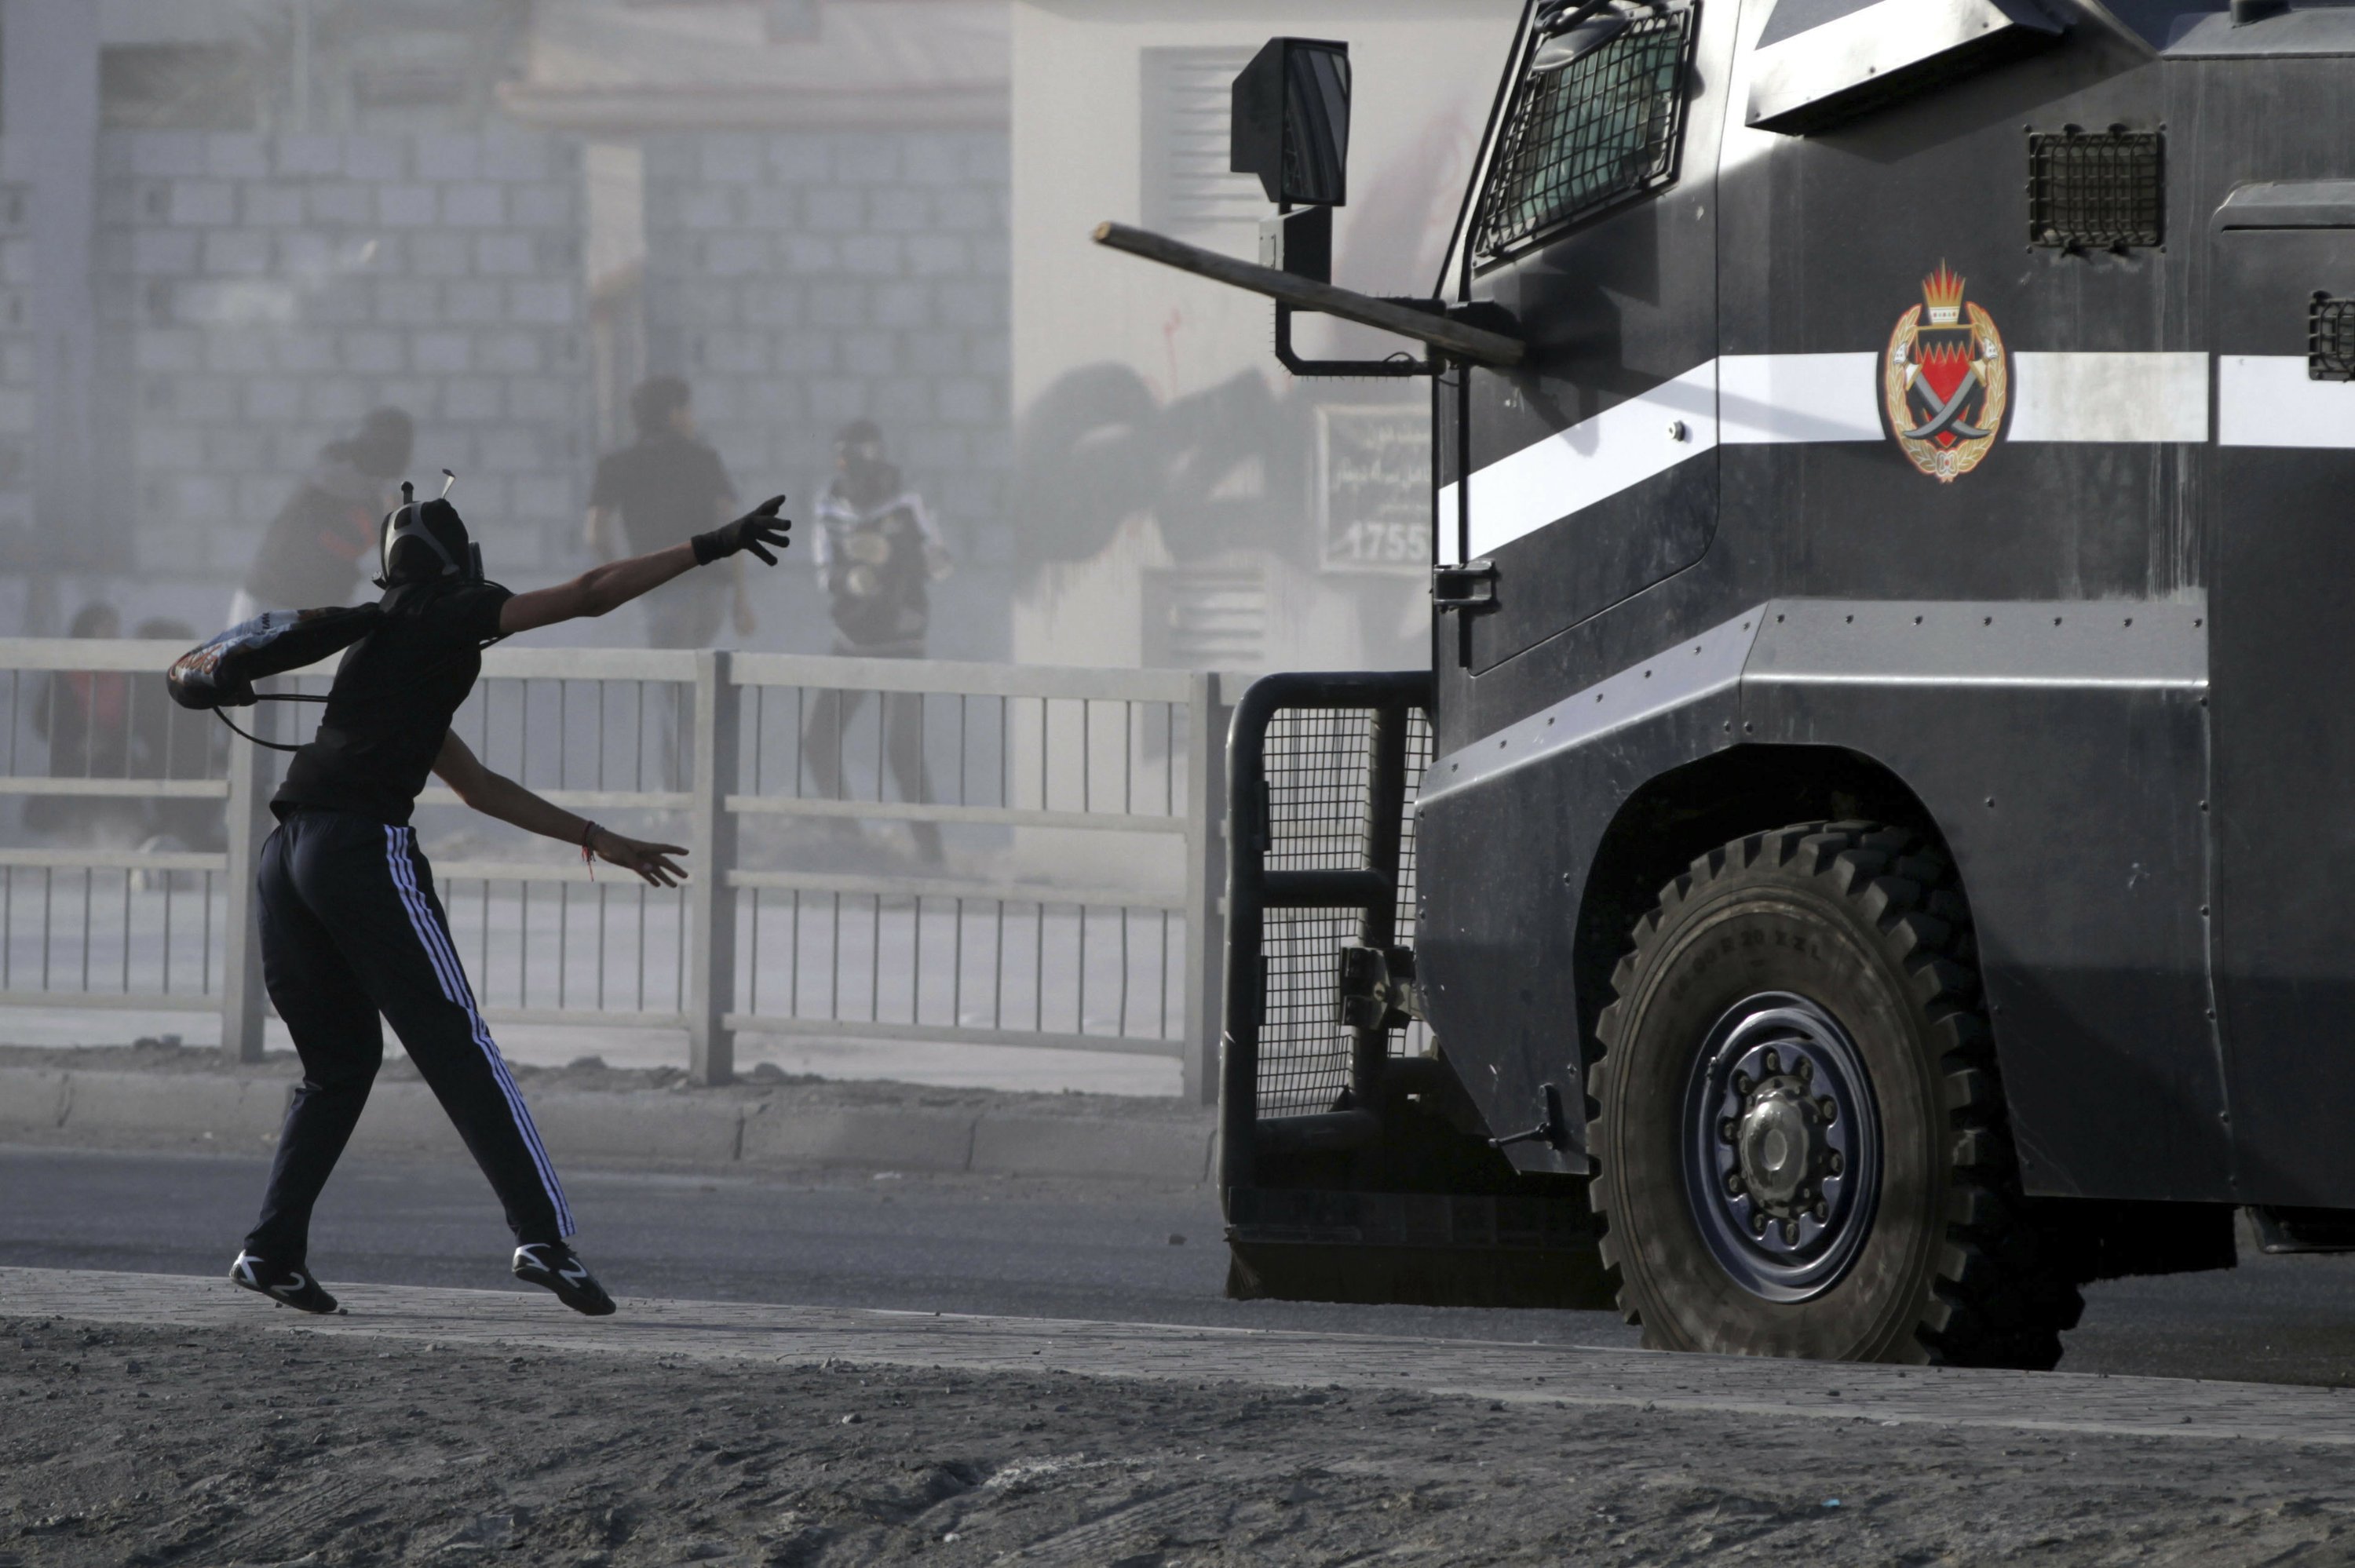 A decade after the 2011 protests, Bahrain suppressed any dissent